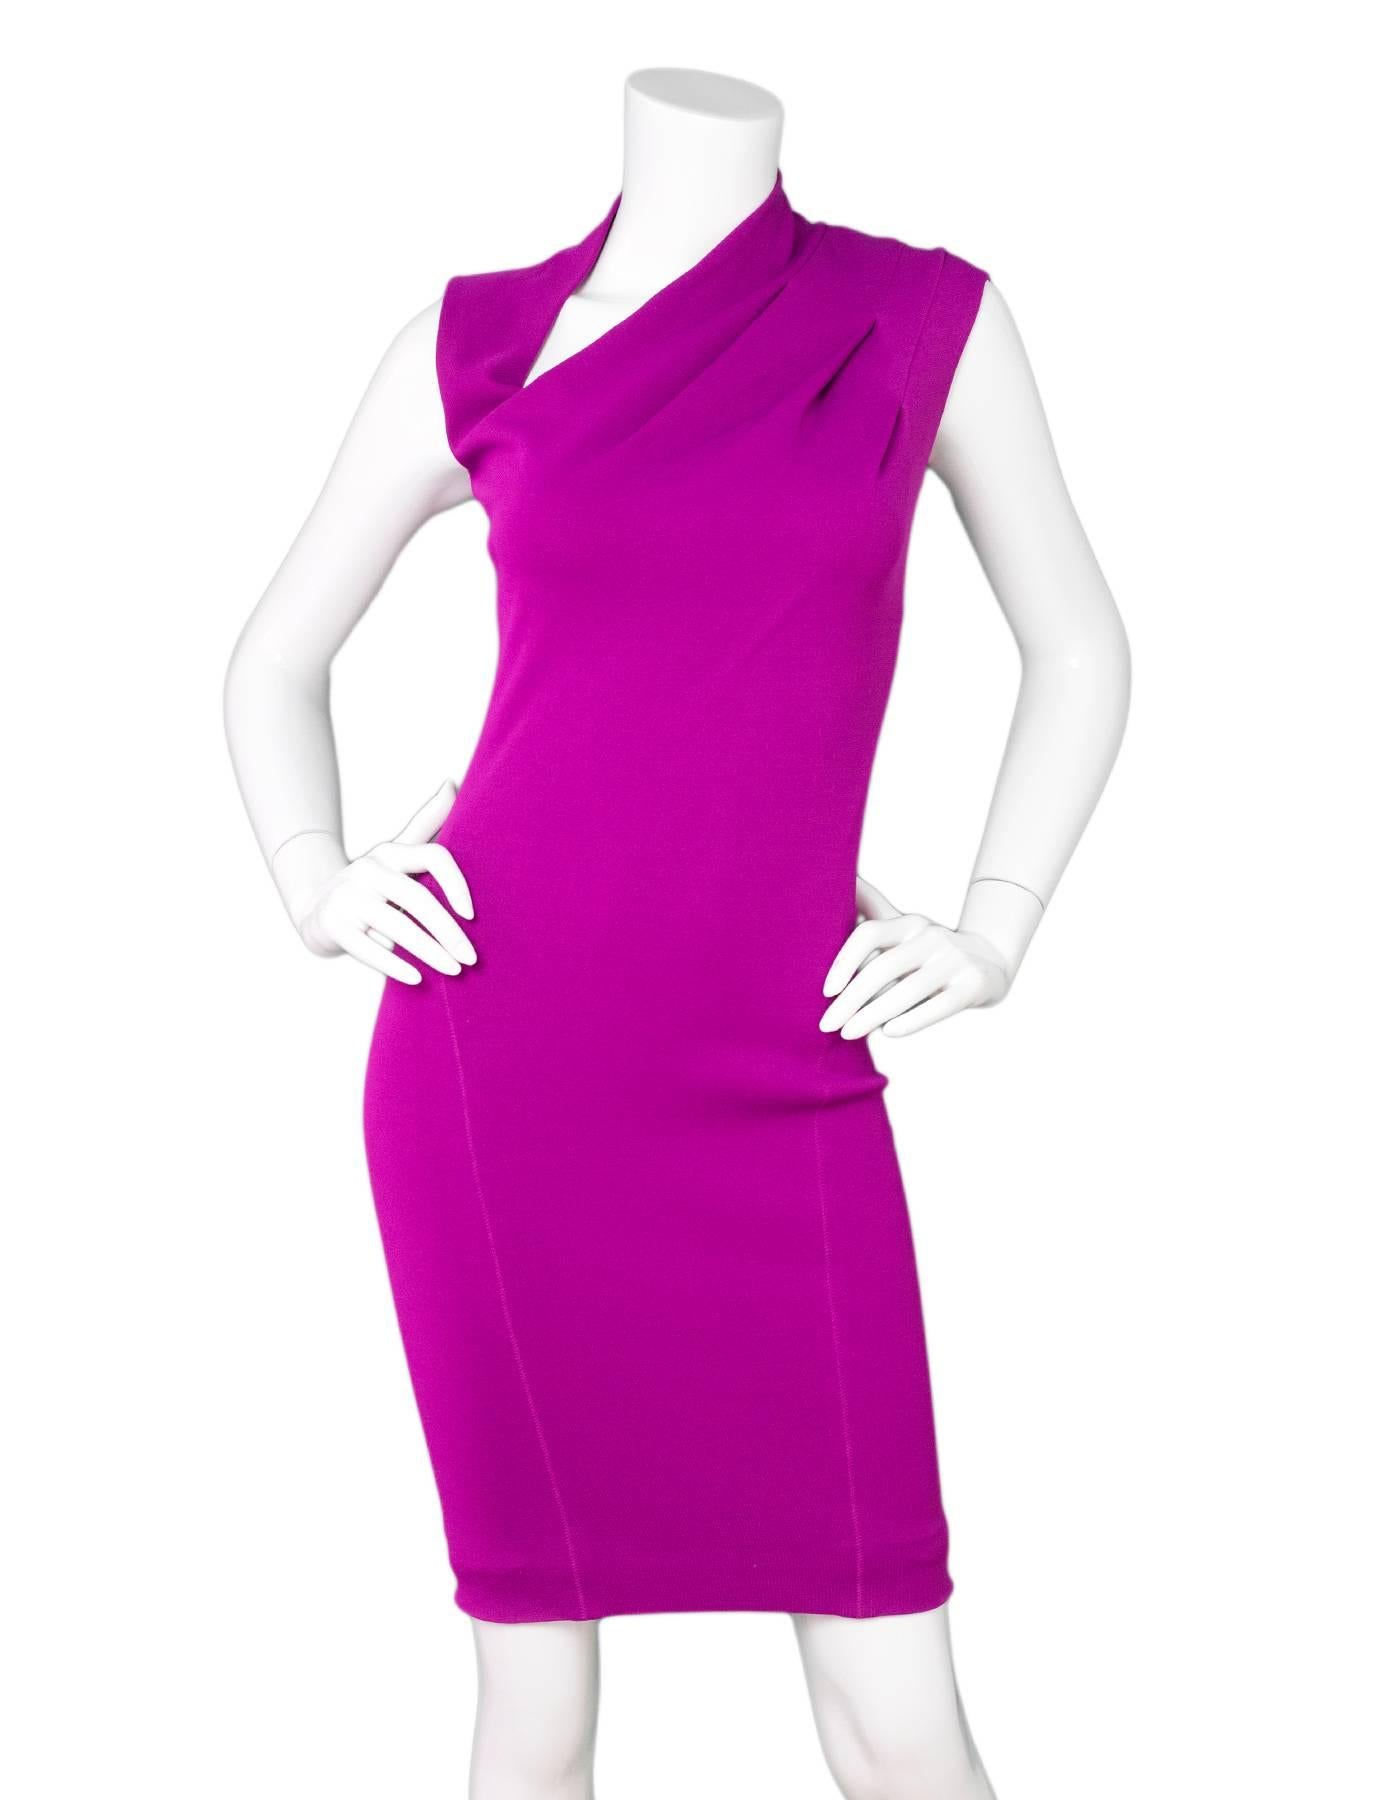 Donna Karan Purple Dress with Cowl Neck

Made In: China
Color: Purple
Composition: Not listed, feels like nylon blend
Lining: Purple lining
Closure/Opening: Back zip closure
Overall Condition: Excellent pre-owned condition with the exception of some